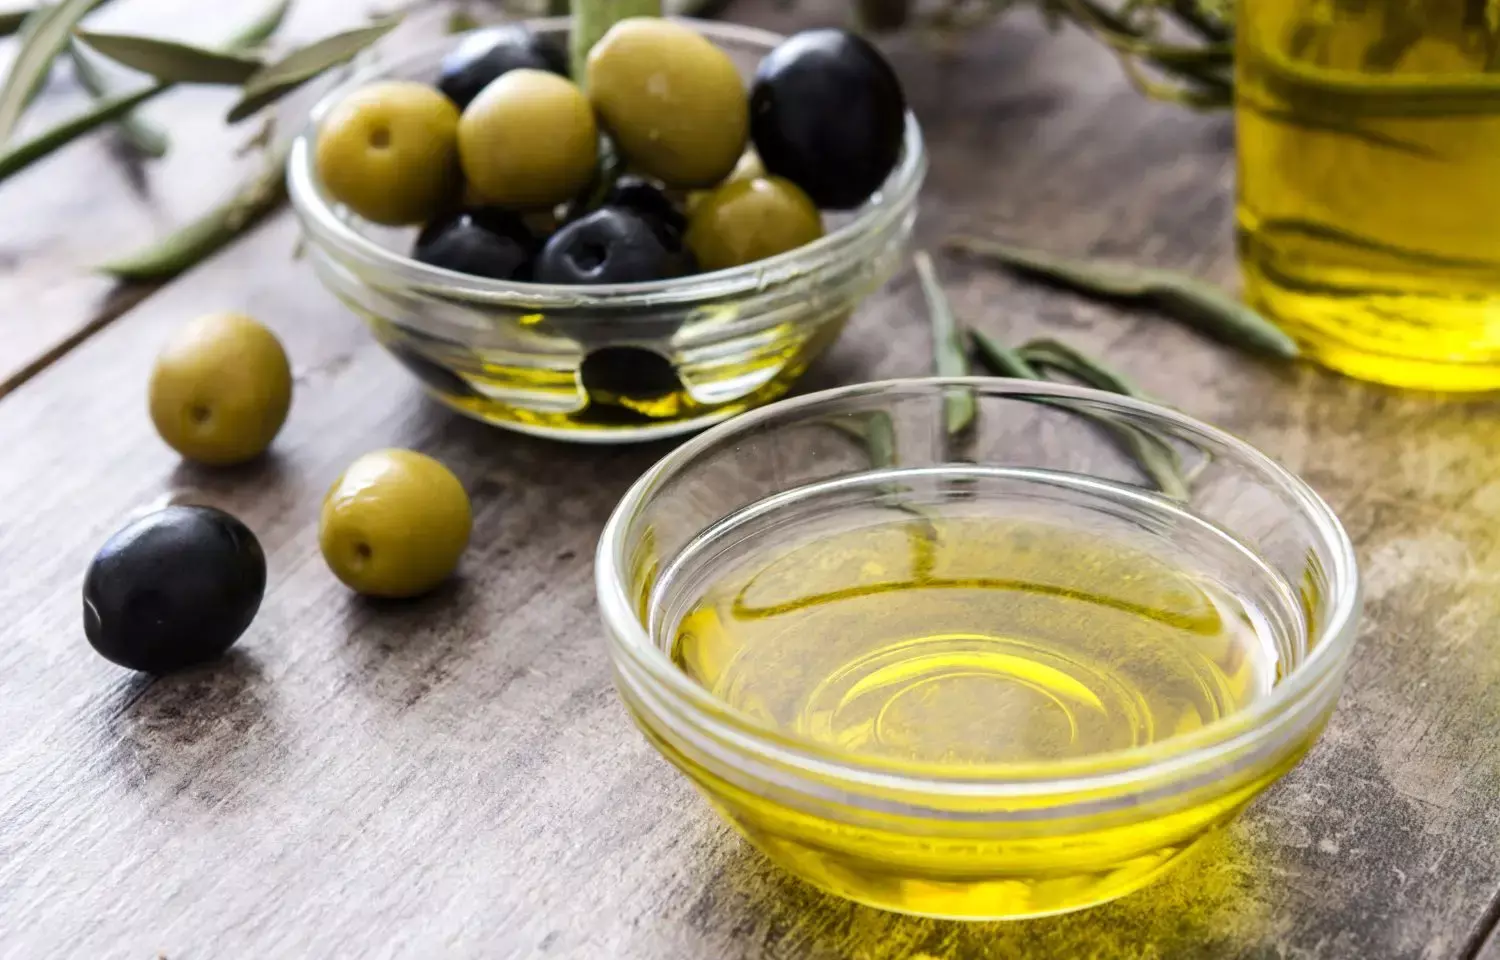 Consumption of extra virgin olive oil during pregnancy increases level of antioxidants in breast milk and in offspring